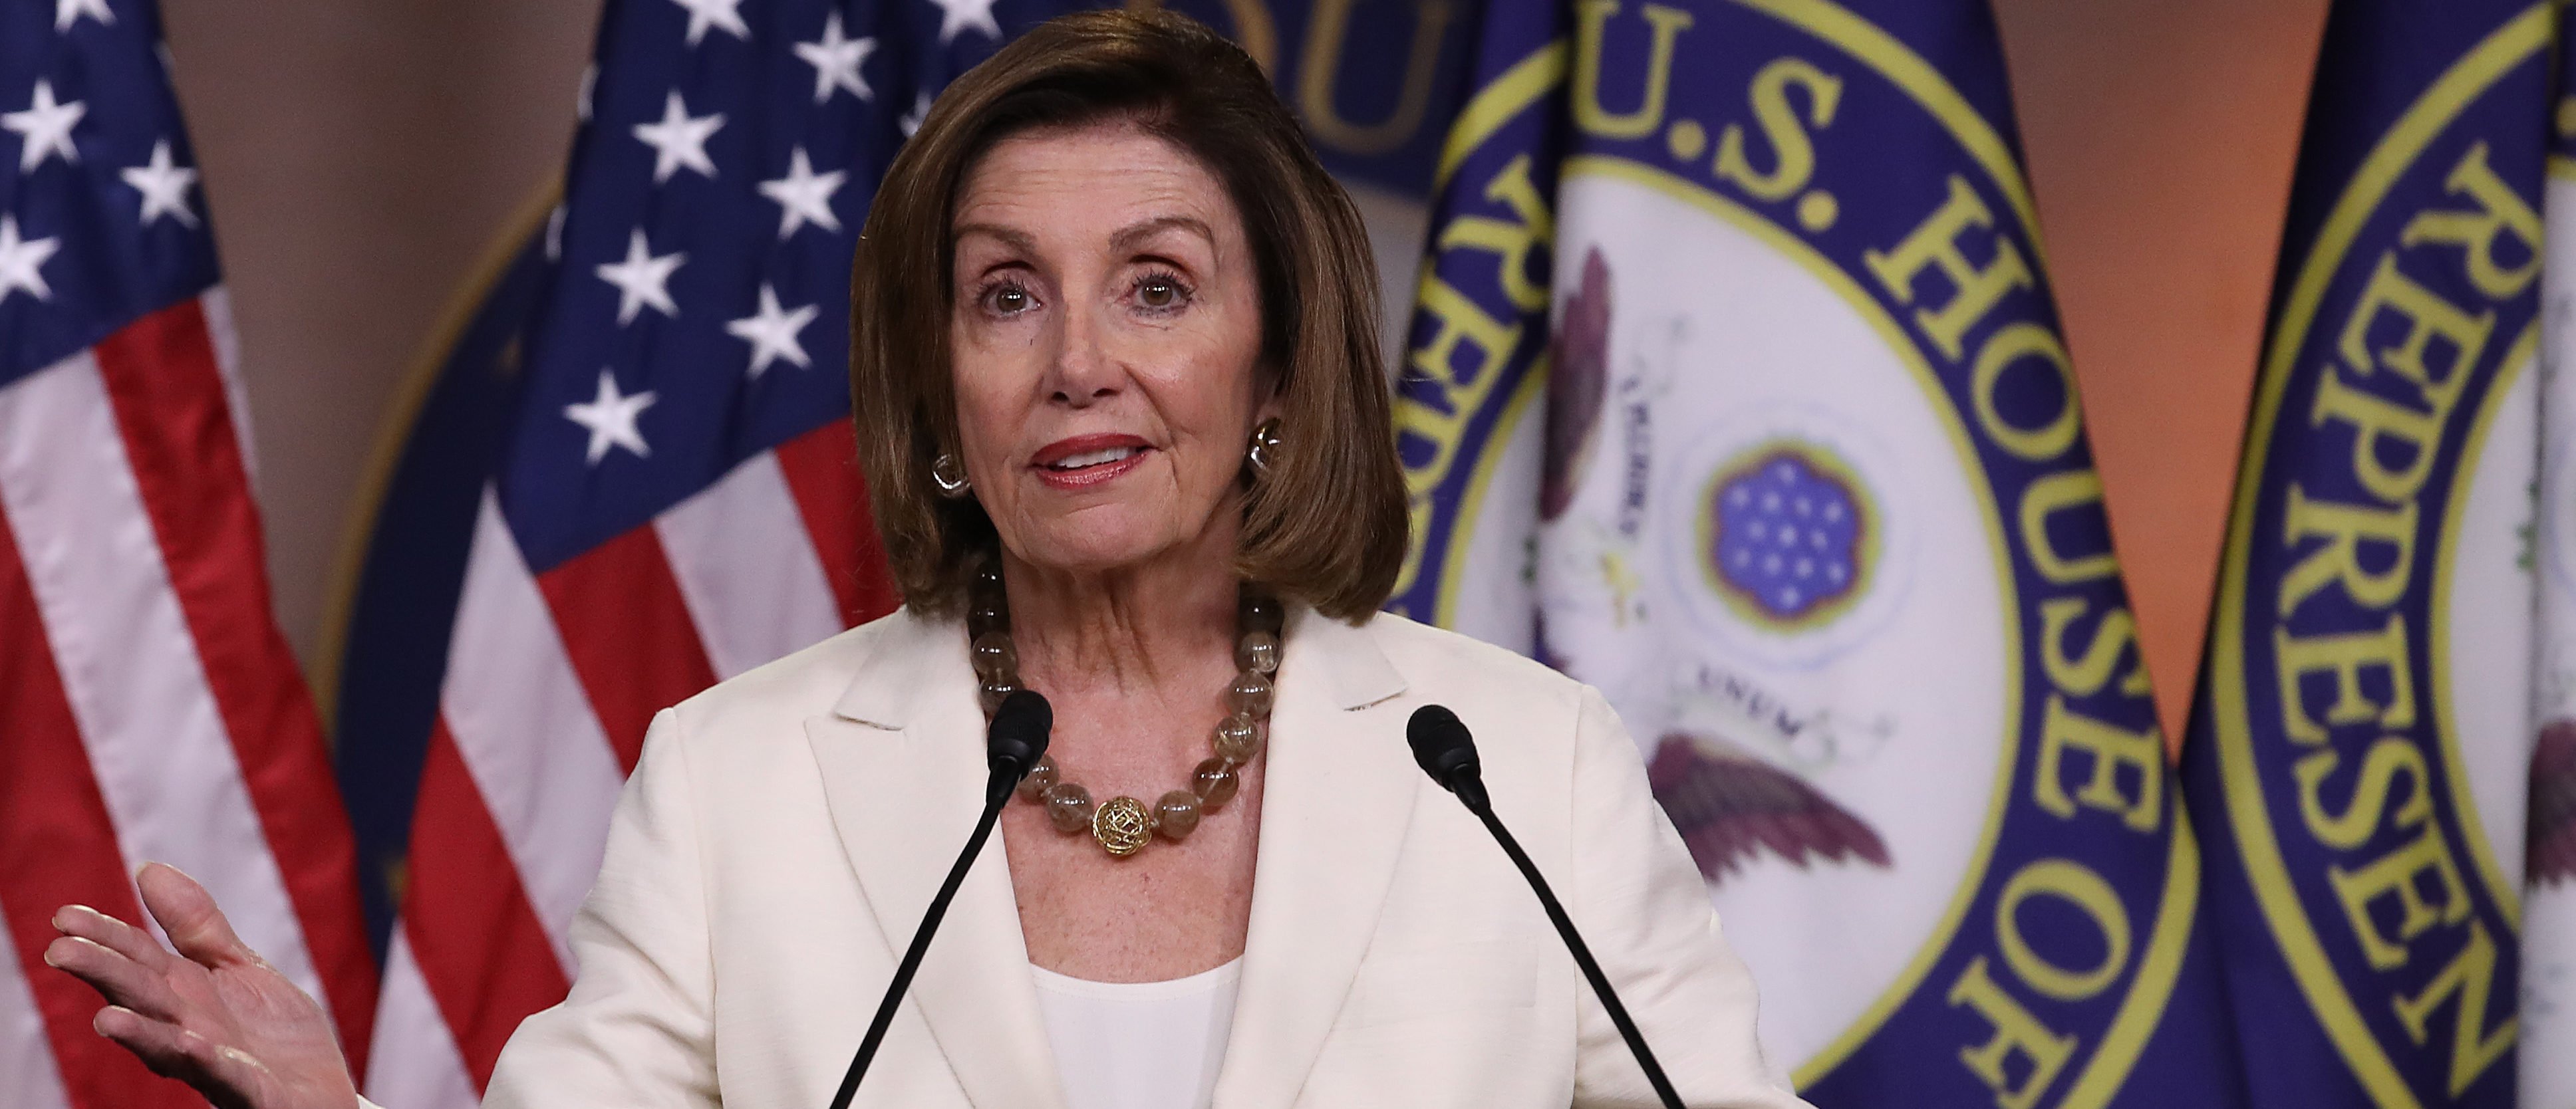 Speaker of the House Nancy Pelosi answers questions during a press conference at the U.S. Capitol on July 11, 2019 in Washington, DC. (Win McNamee/Getty Images)